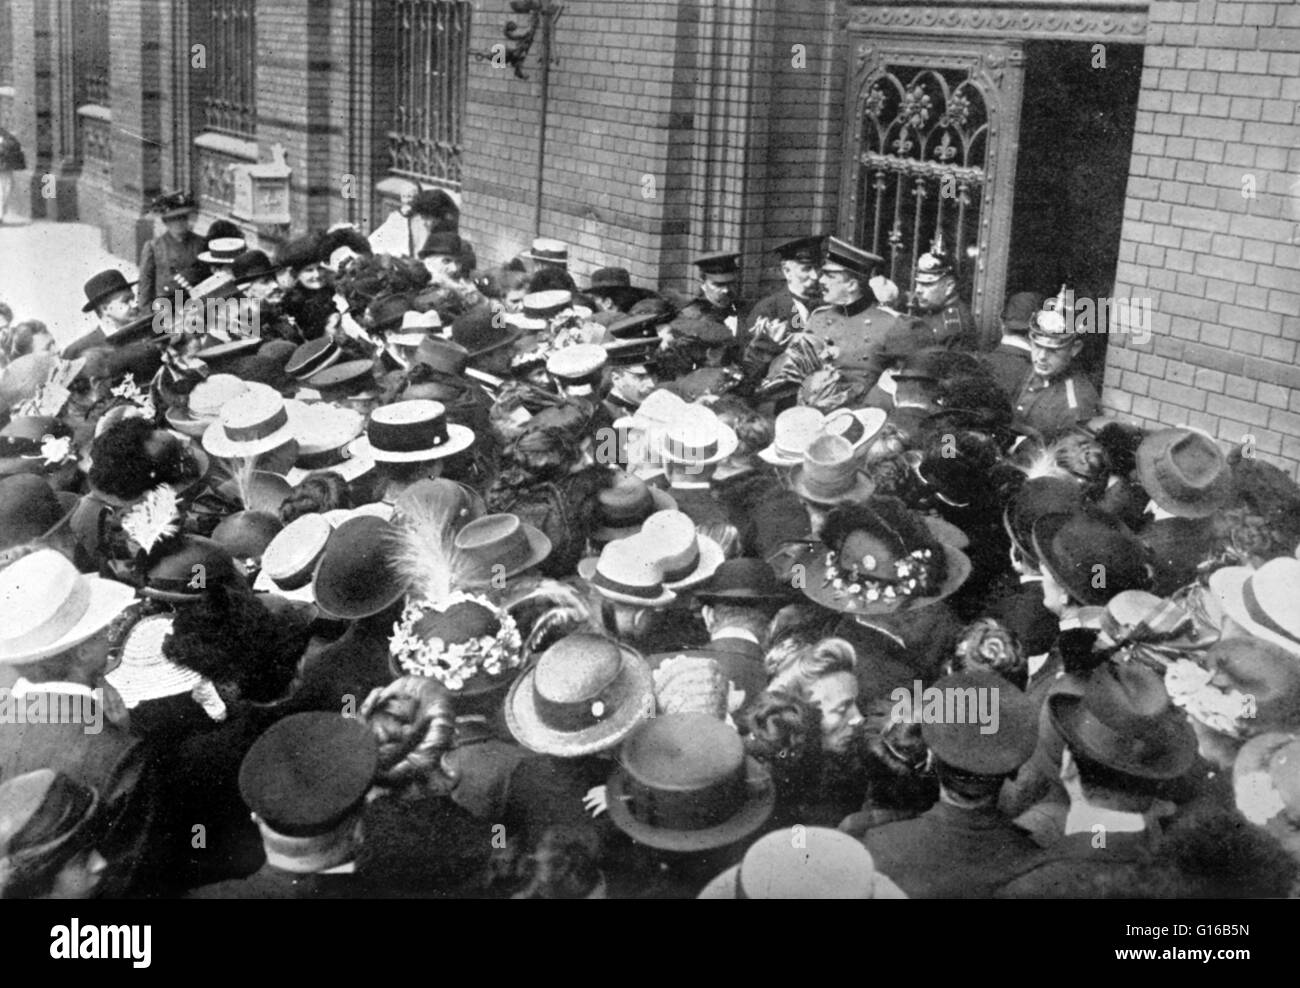 Crowd of people at door of a bank in Berlin, Germany at the beginning of World War I. A bank run occurs when a large number of bank or other financial institution's customers withdraw their deposits simultaneously due to concerns about the bank's solvency Stock Photo